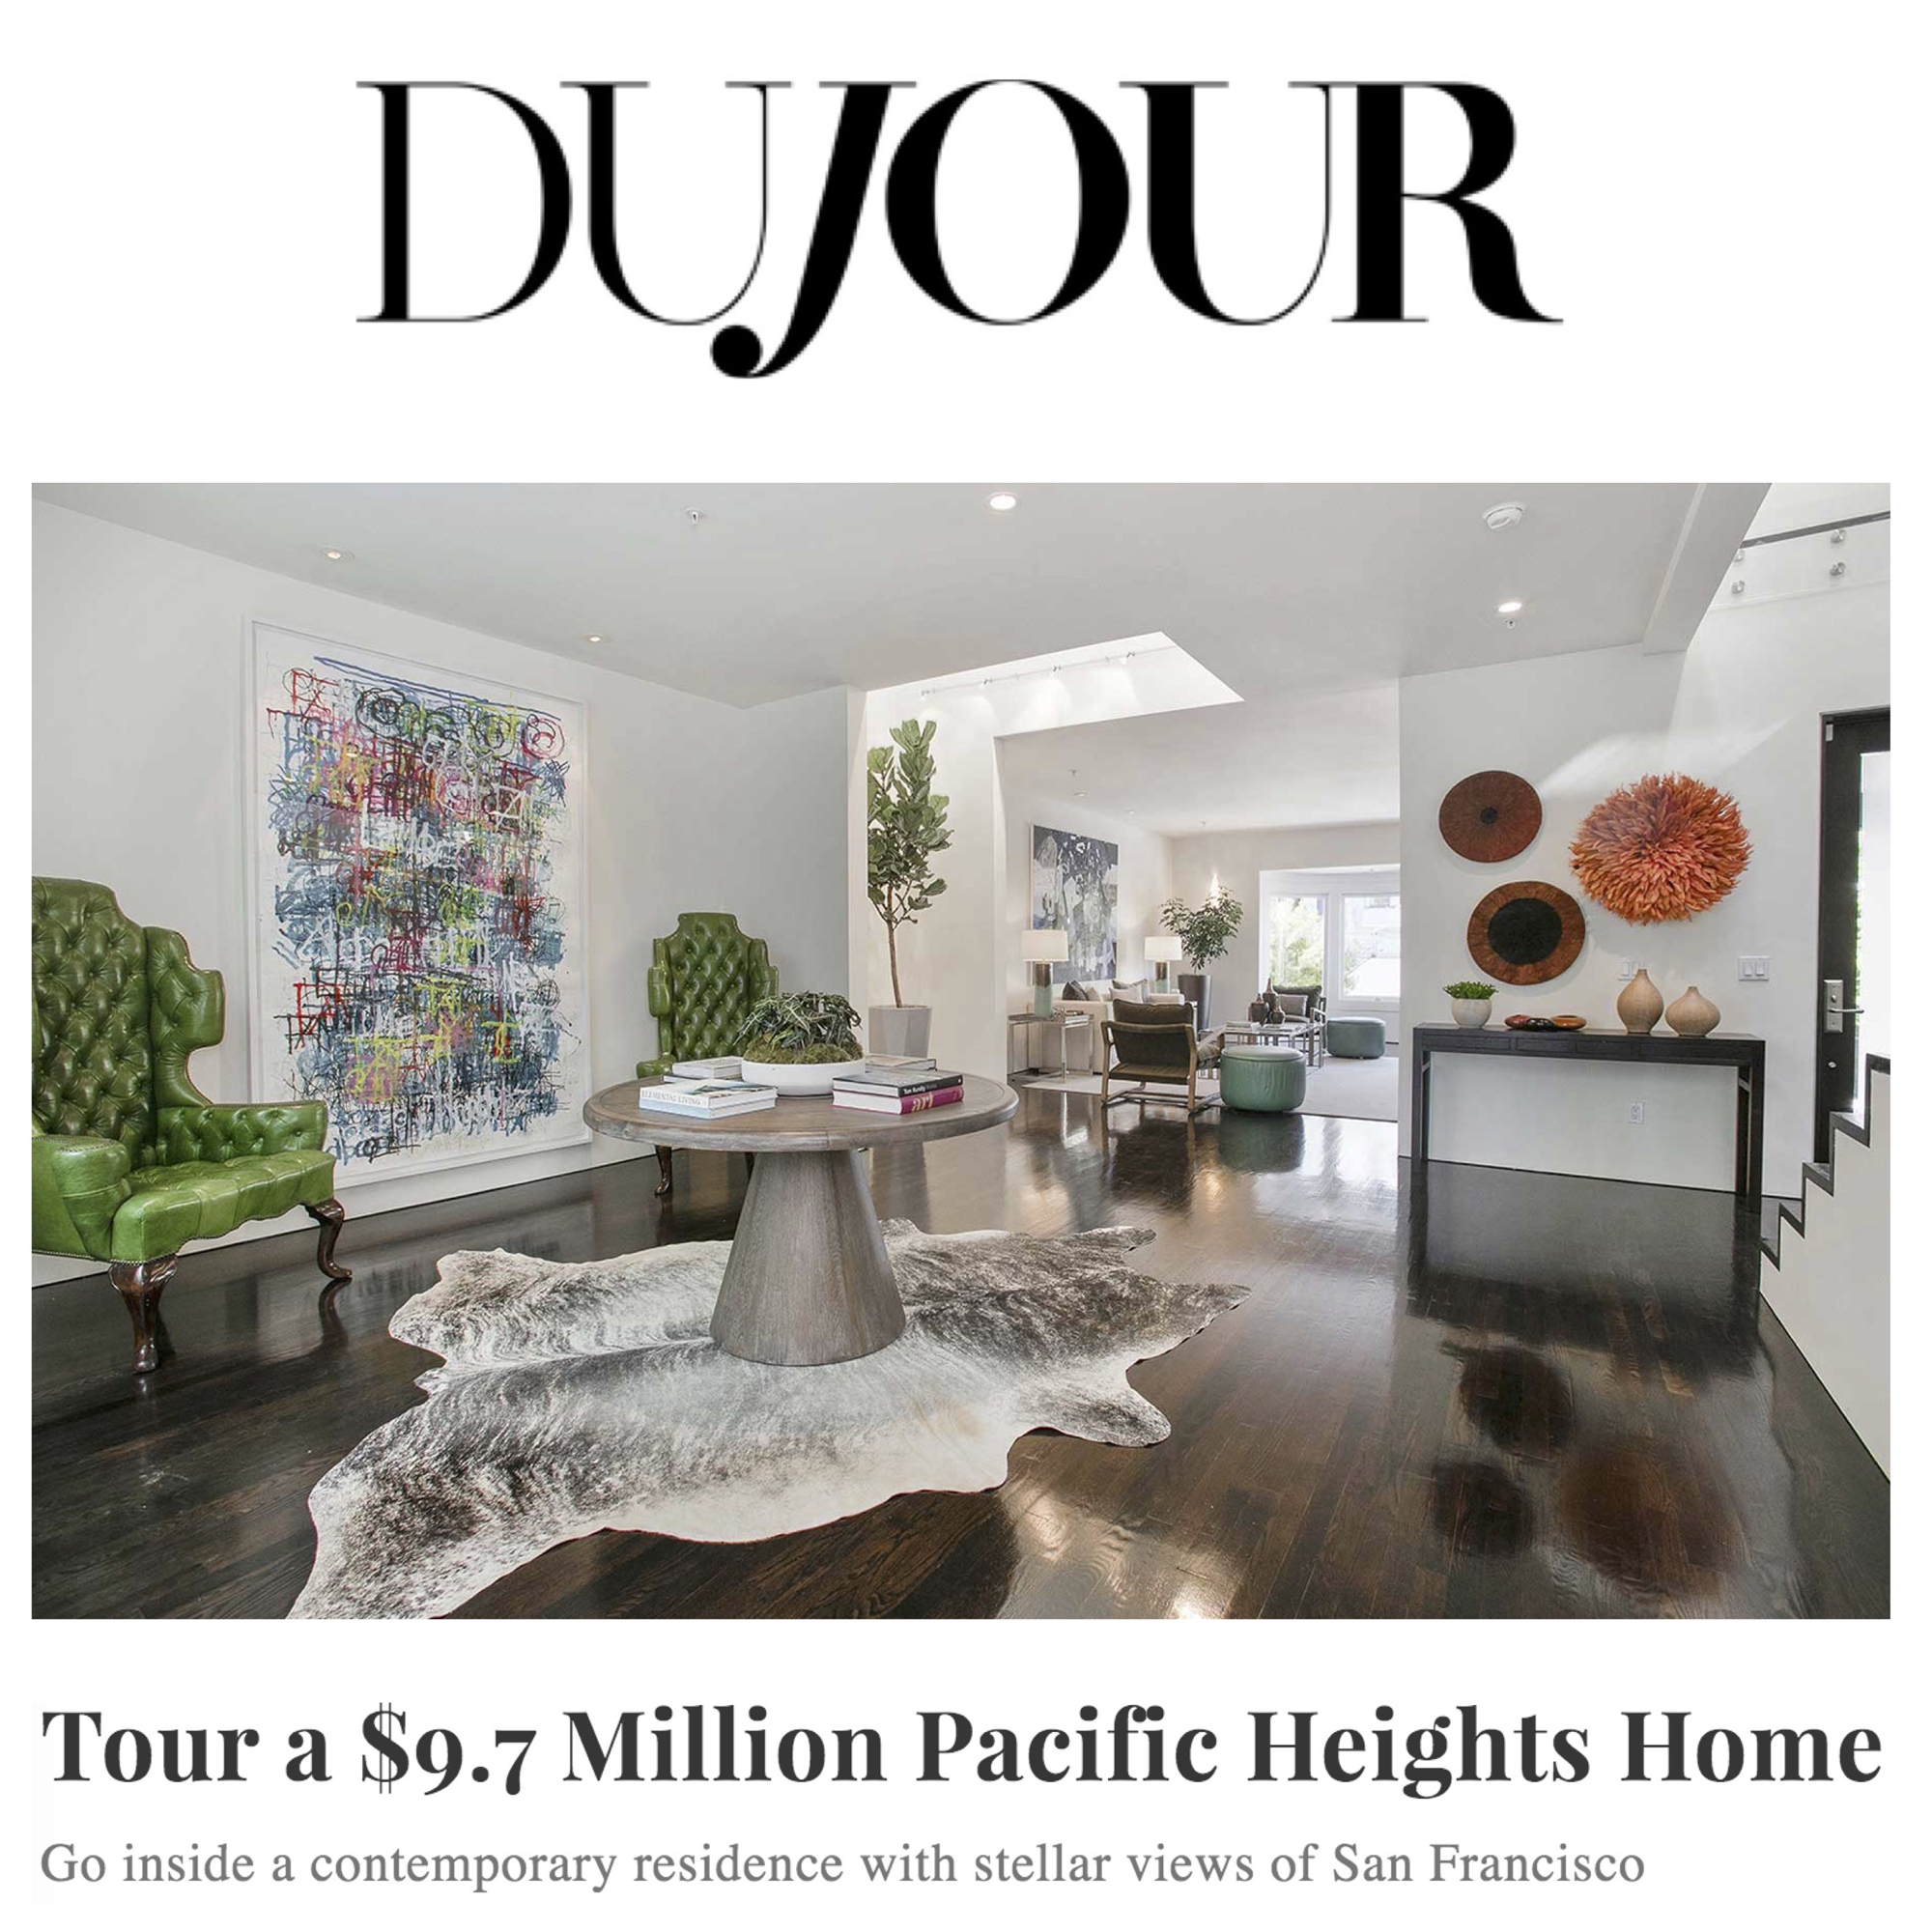 $9.7 Million Pacific Heights Home